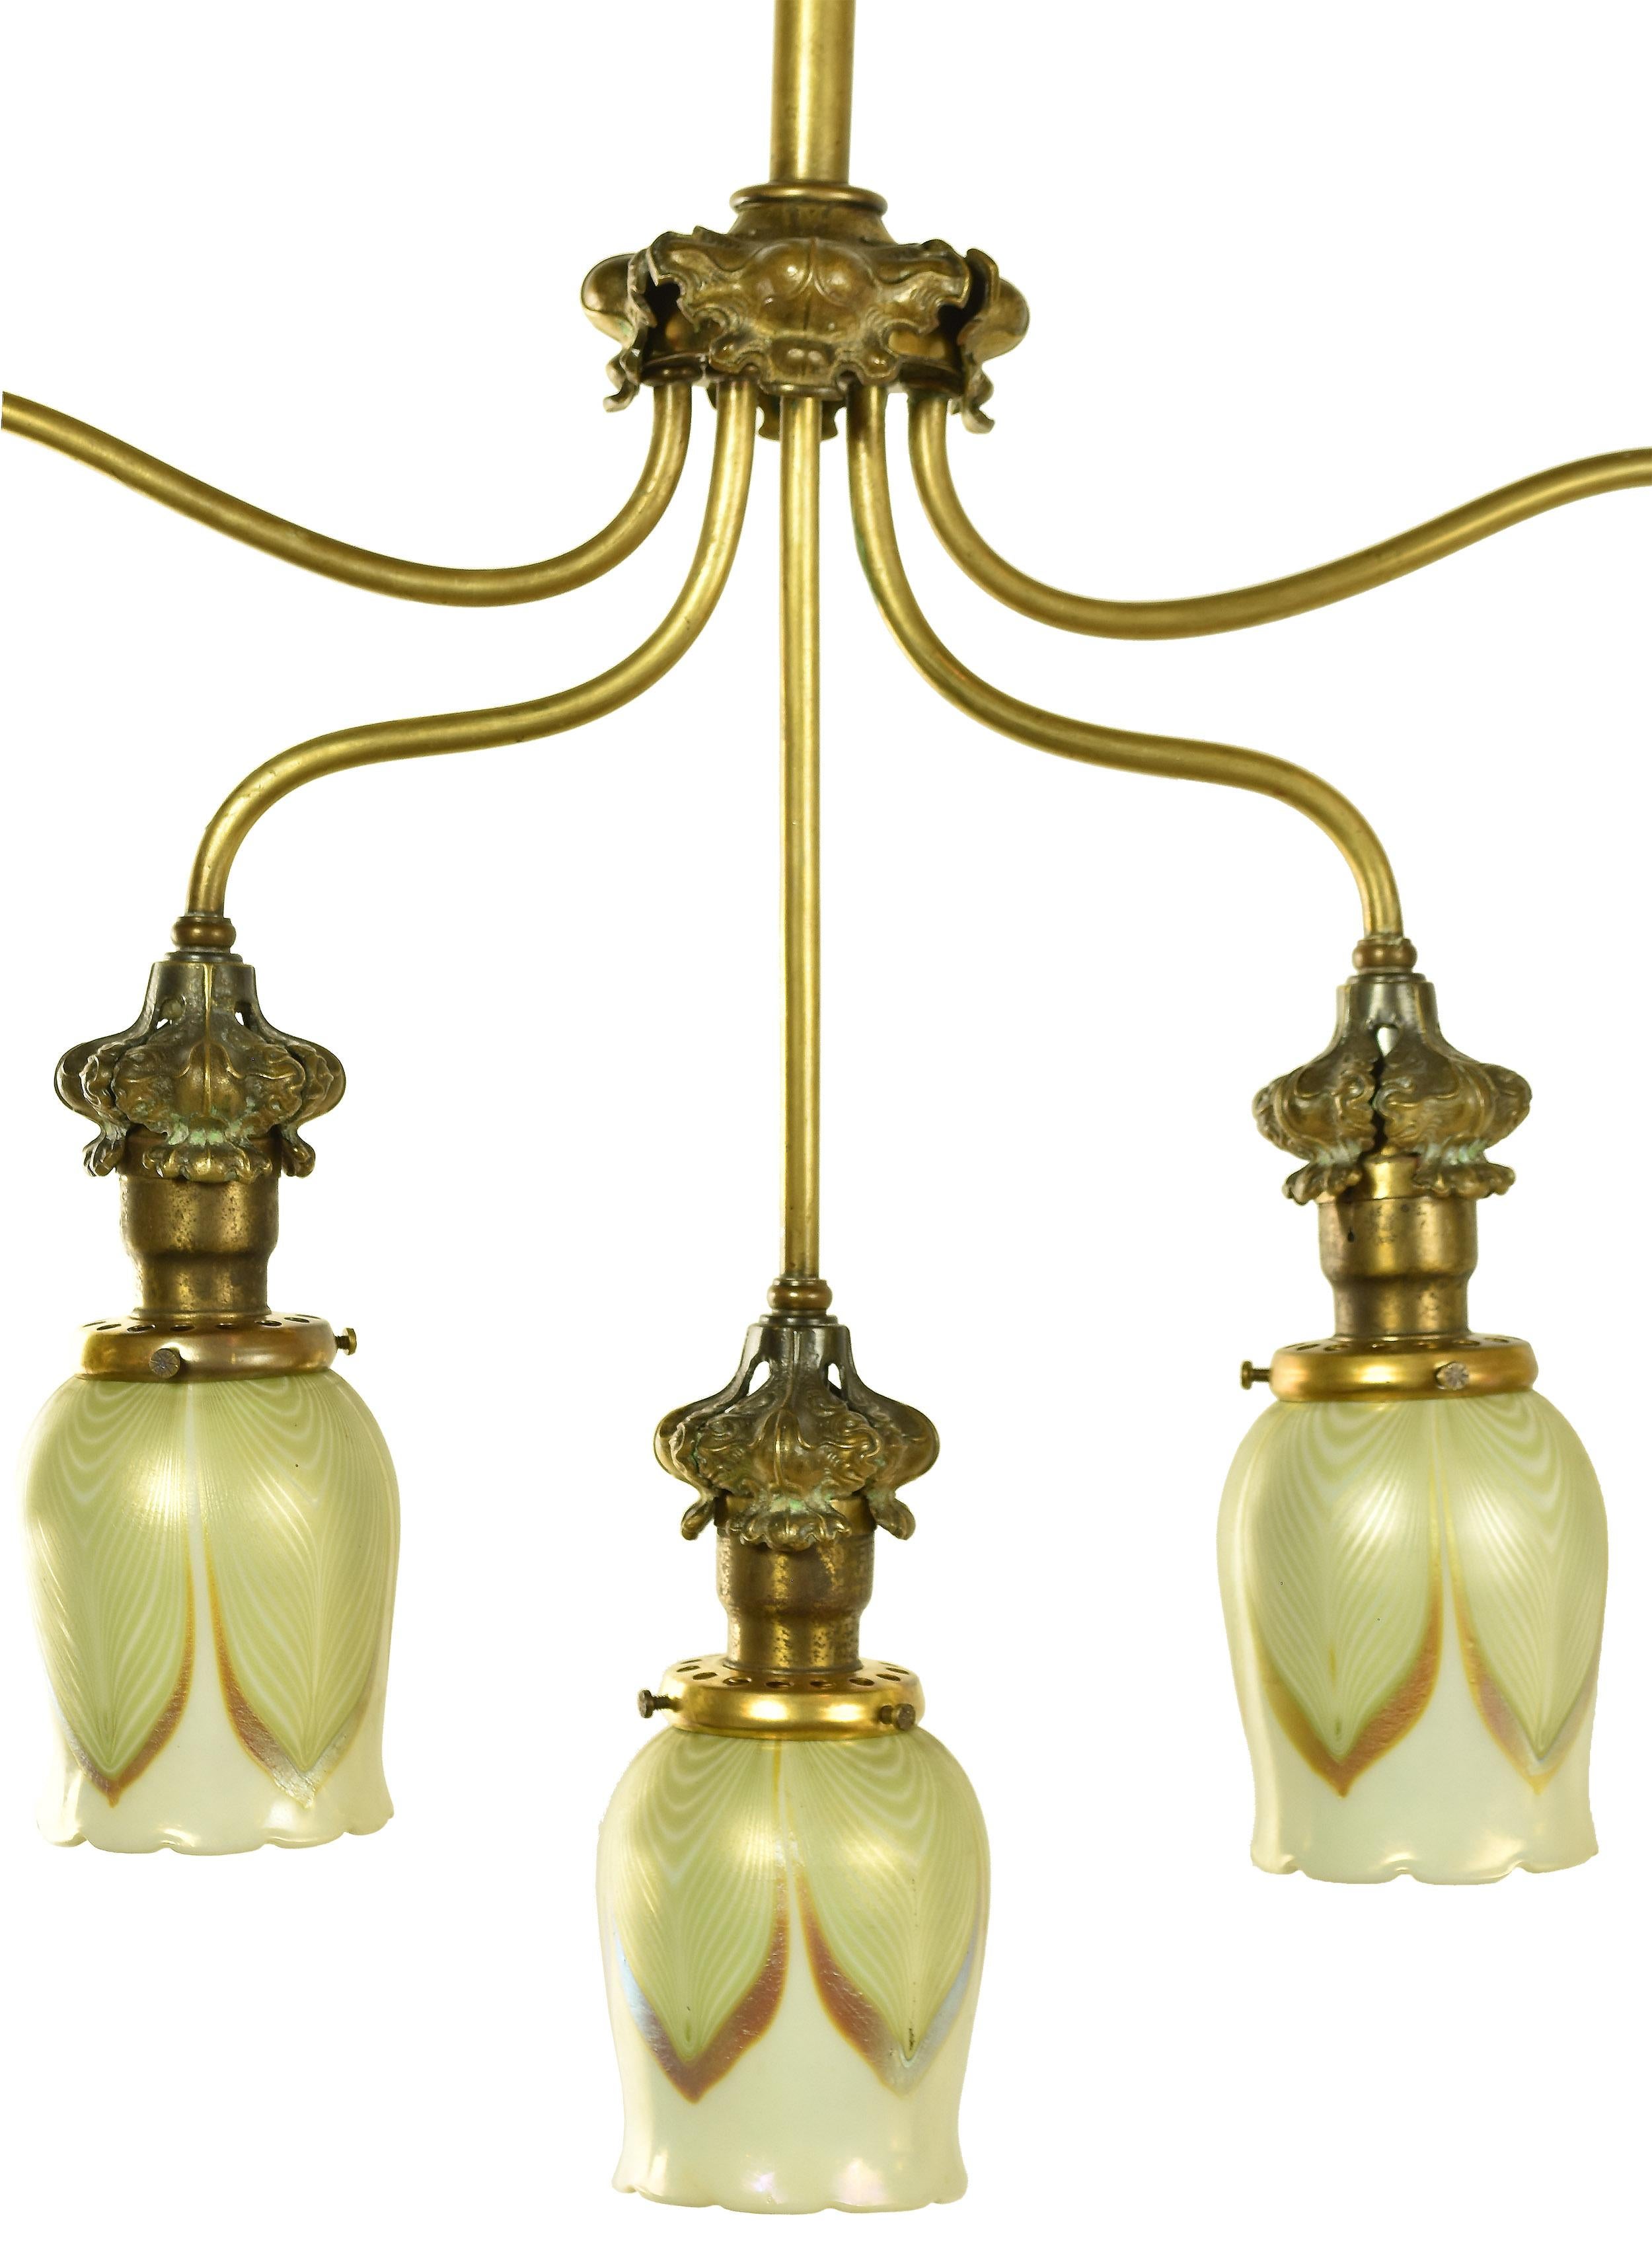 One available

This five-light crocket pendant is truly unique. With its symmetry, sweeping arms, and floral details, this art nouveau item is distinctive yet timeless. This pendant would make a great decorative piece in any living space.

circa